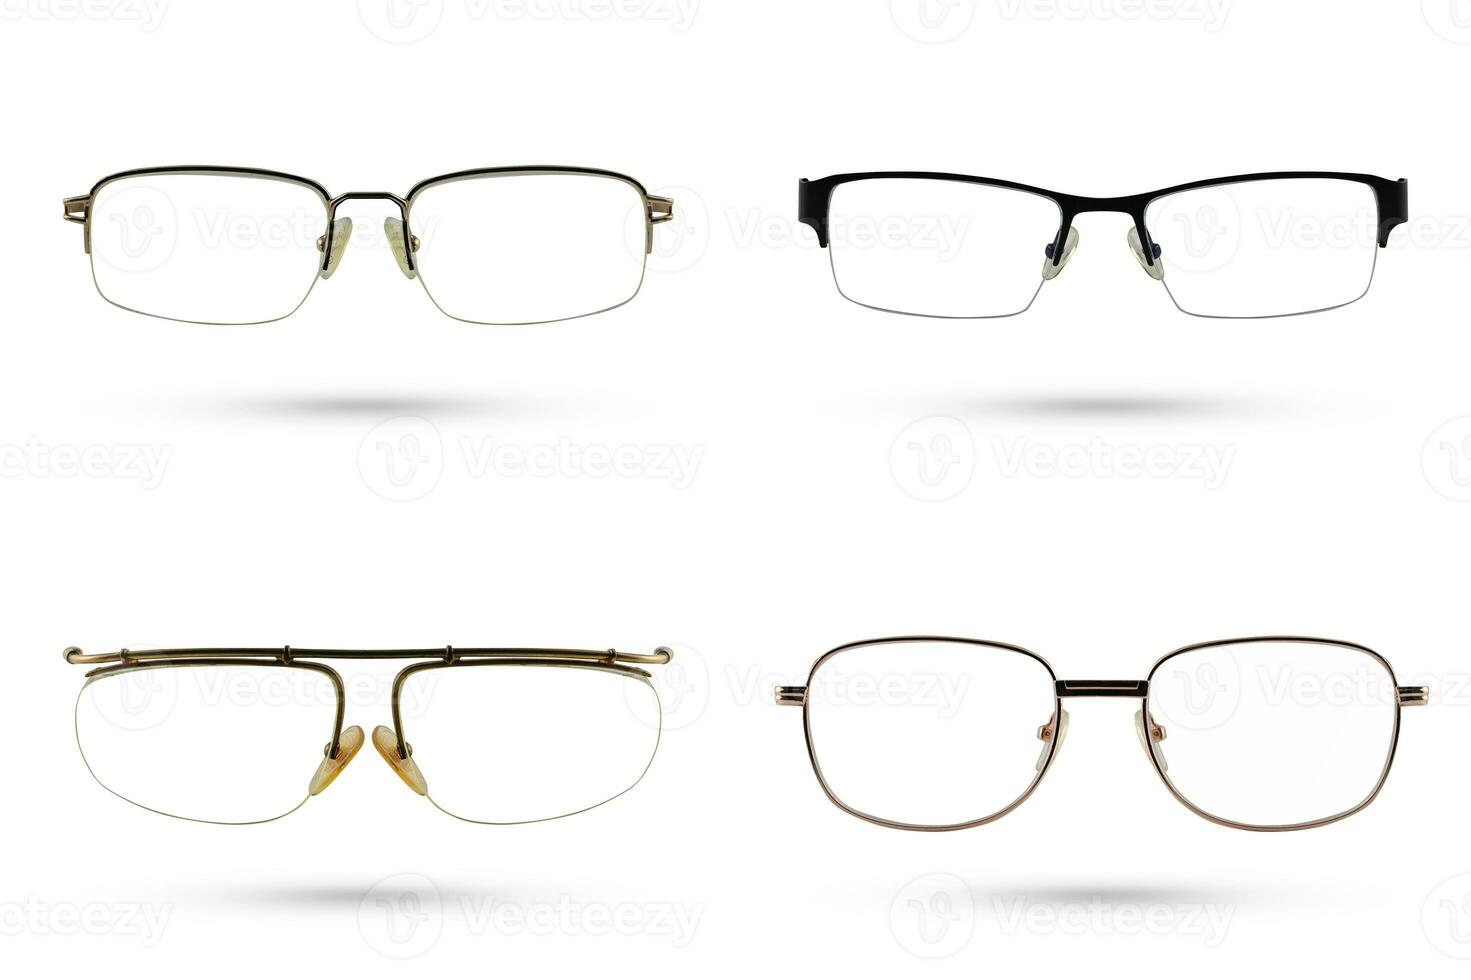 Classic Fashion eyeglasses style collections isolated on white background. photo